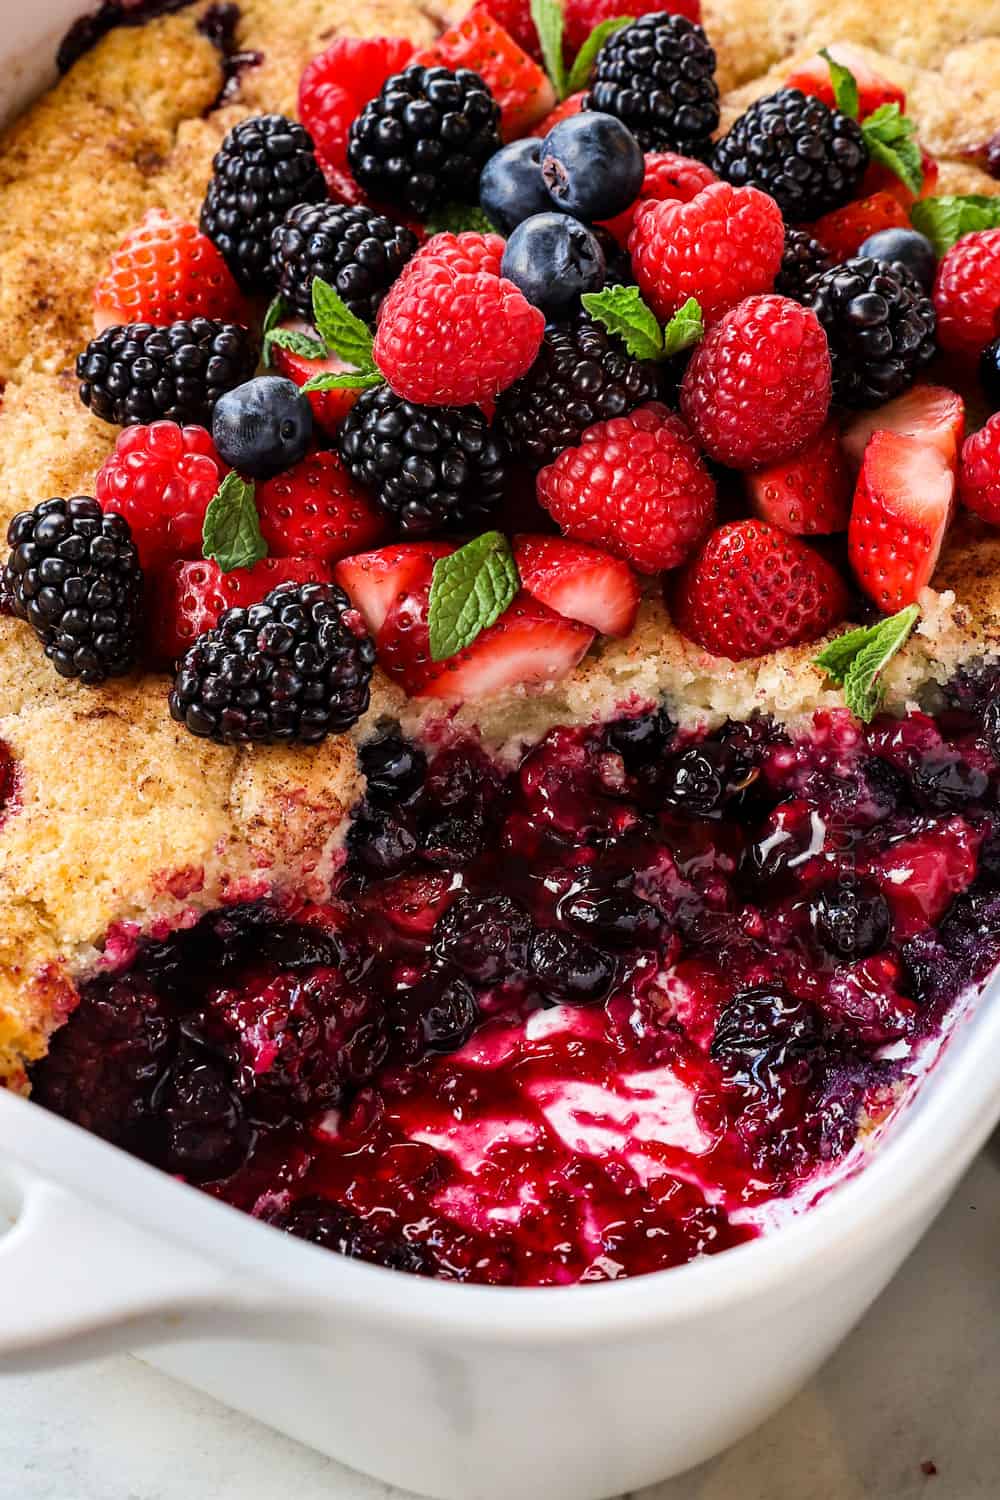 up close of berry cobbler recipe showing the thick, juicy mixed berry filling